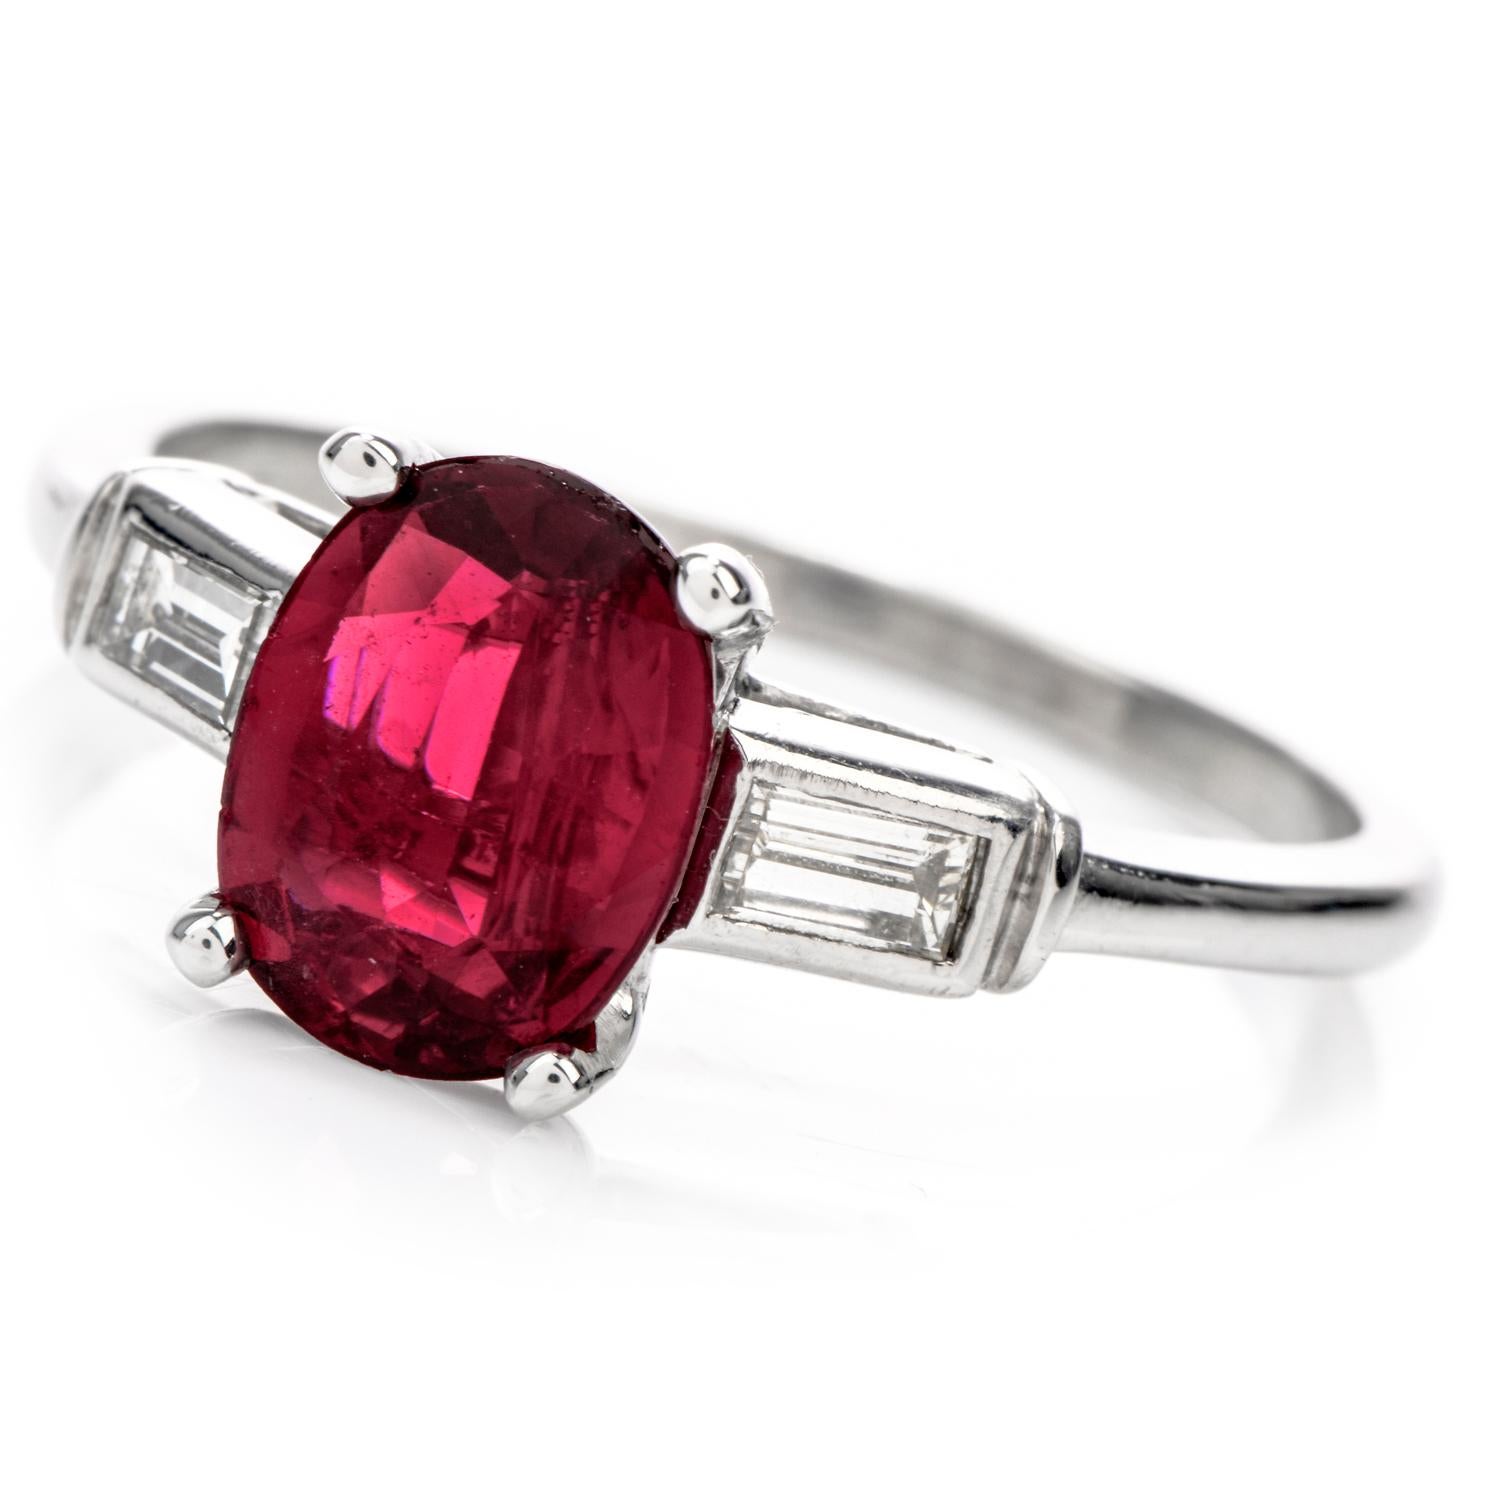 This brightly colored Engagement ring was inspired in a 3 stone design and crafted in Platinum.

Adorning the center is a transparent GIA certified vibrant Red Ruby weighing approx. 1.80 carats, Thailand origin, measuring 9.01 x 6.59 x